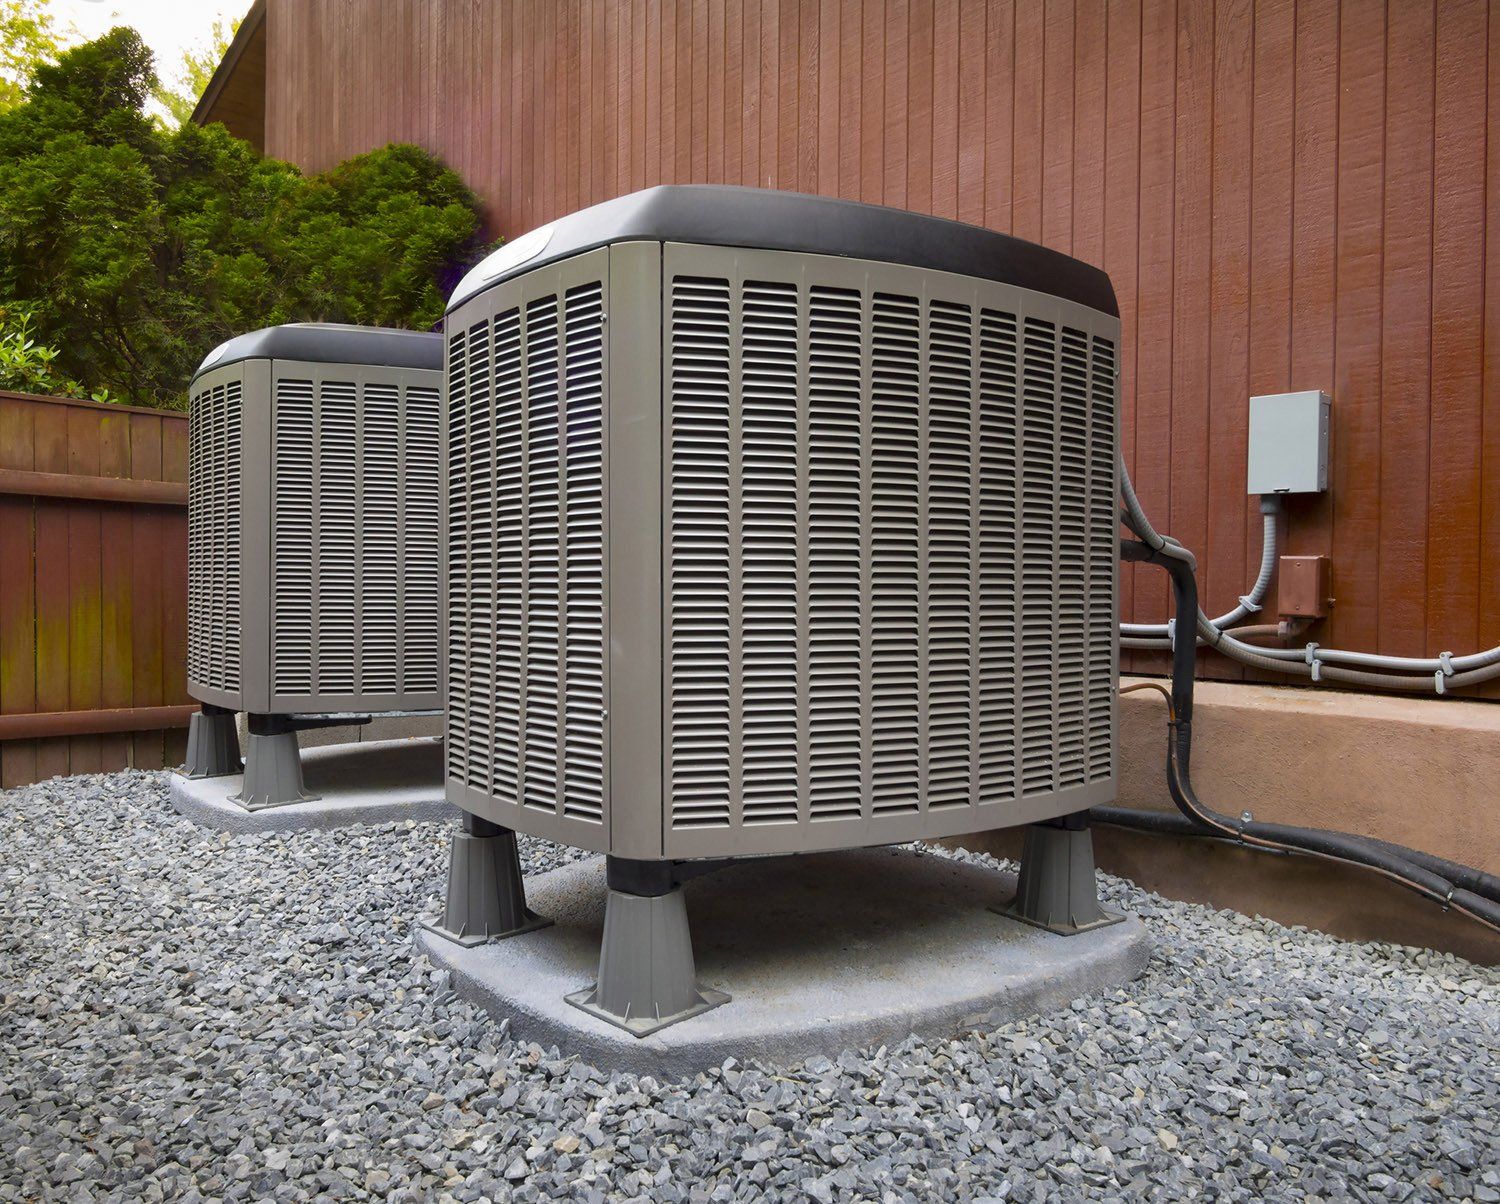 HVAC Heating and Air Conditioning Residential Units | Allentown, PA | Wisser Coal & Fuel Oil